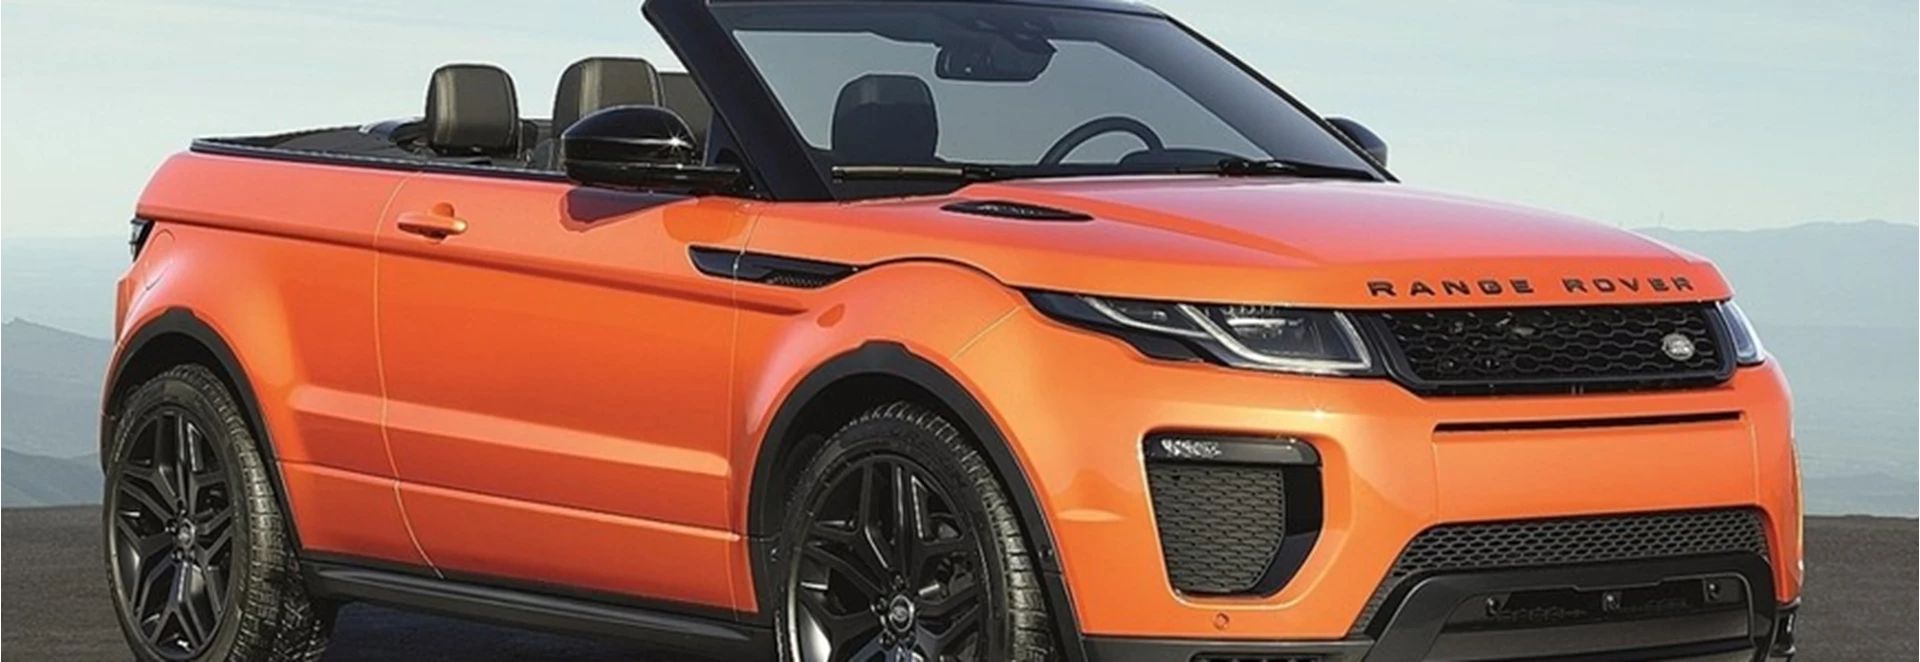 The new Range Rover Evoque Convertible is here